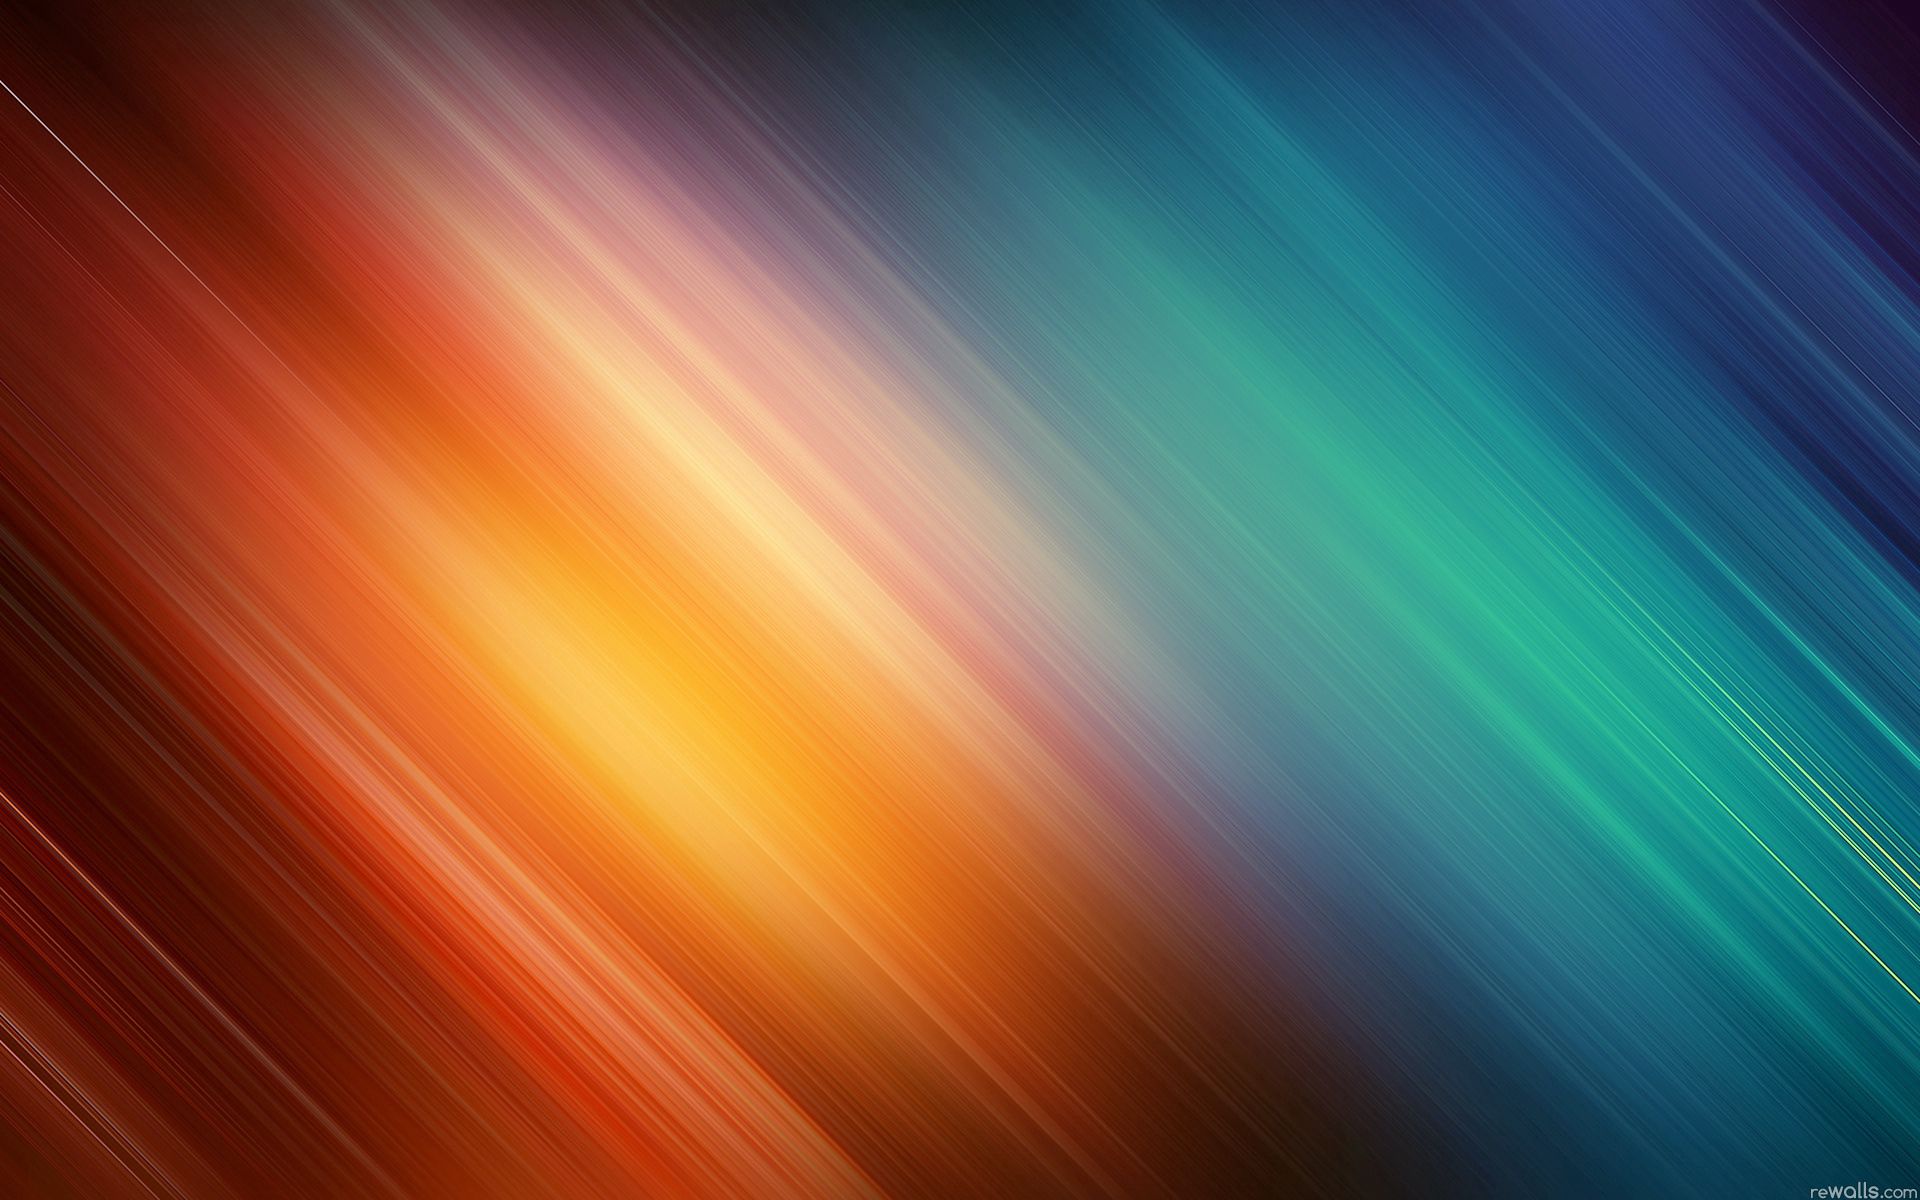 bright, abstract, shine, light, lines, obliquely UHD